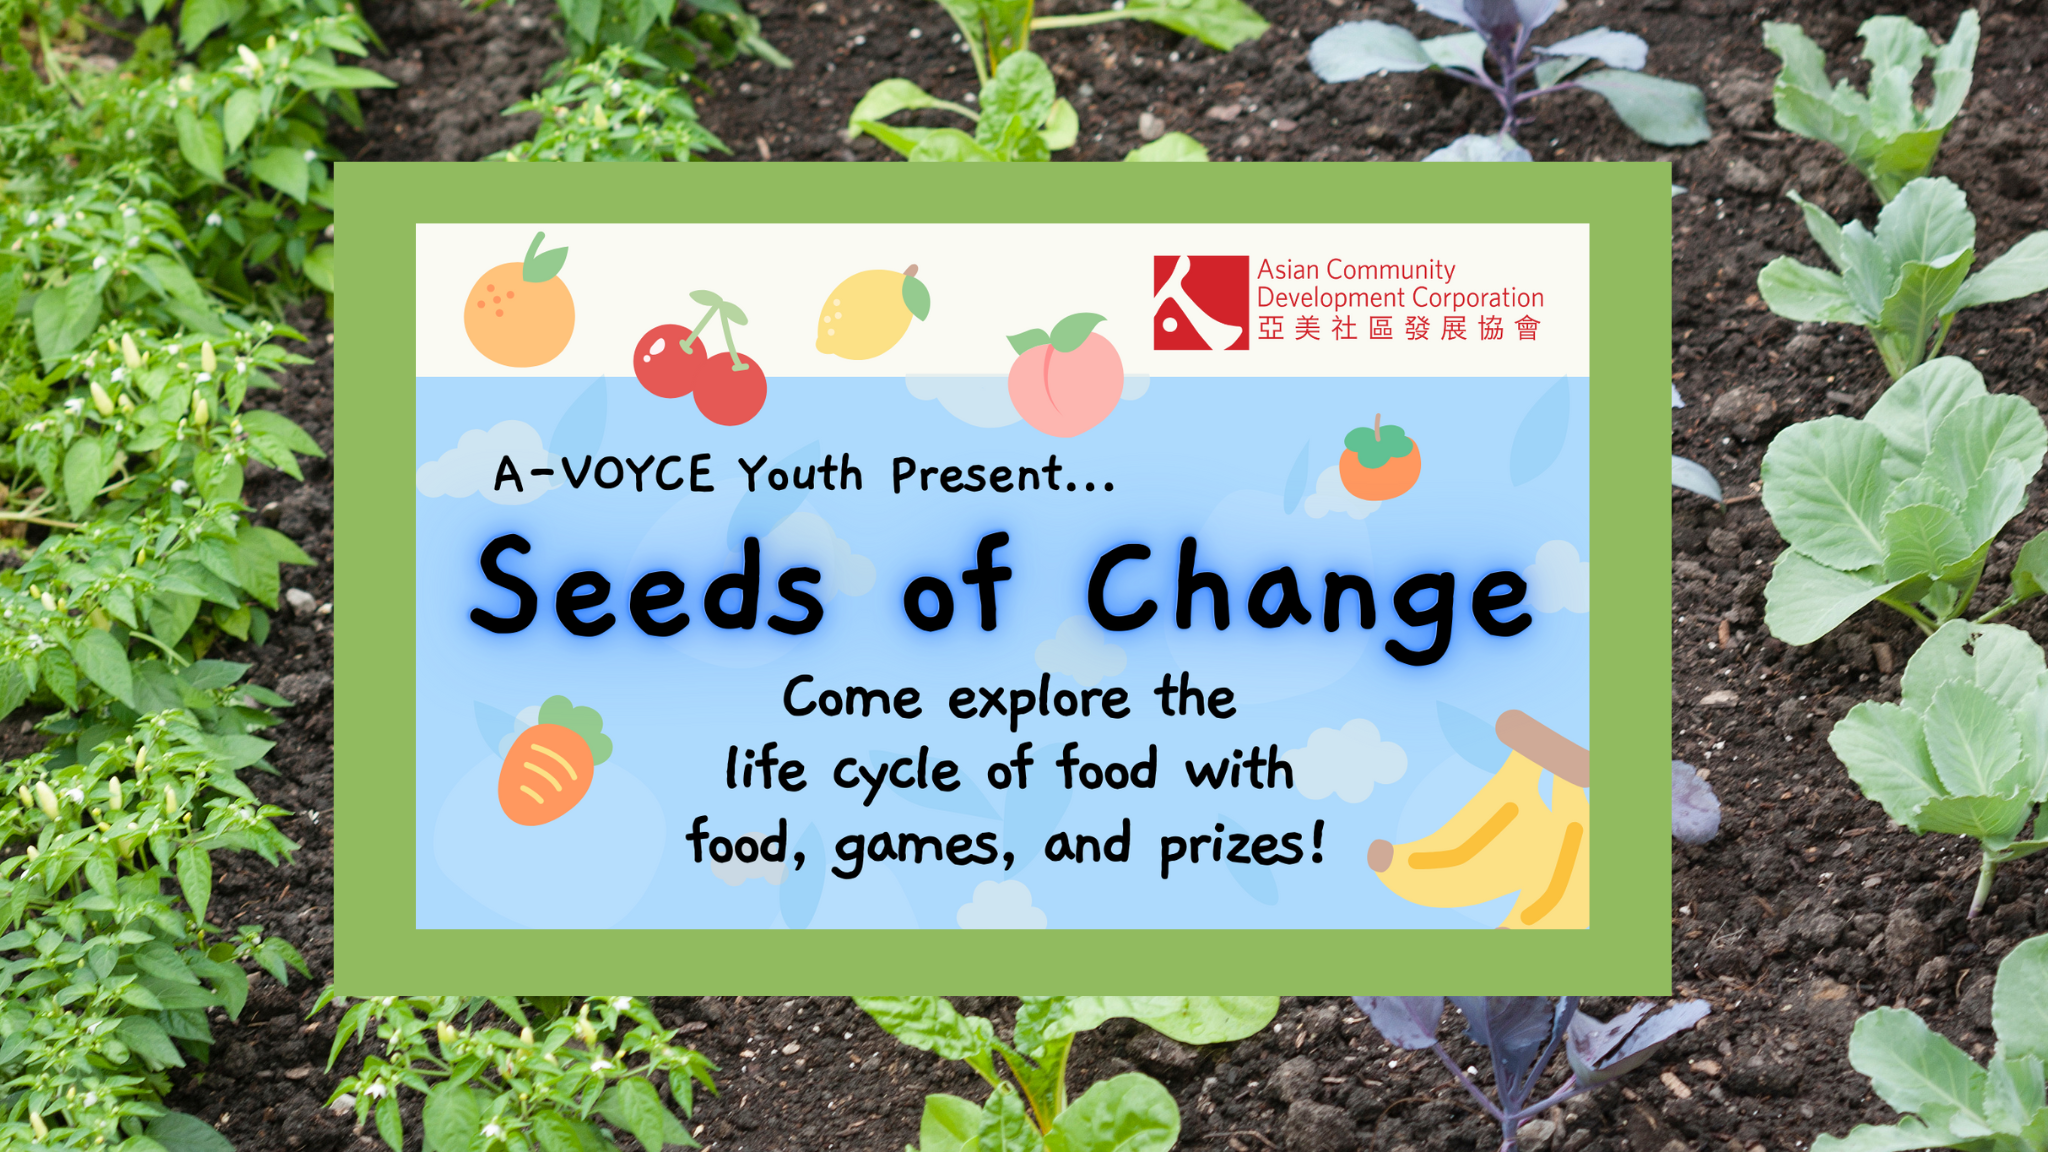 graphic photo of vegetable garden and poster of "seeds of change" with light blue background.